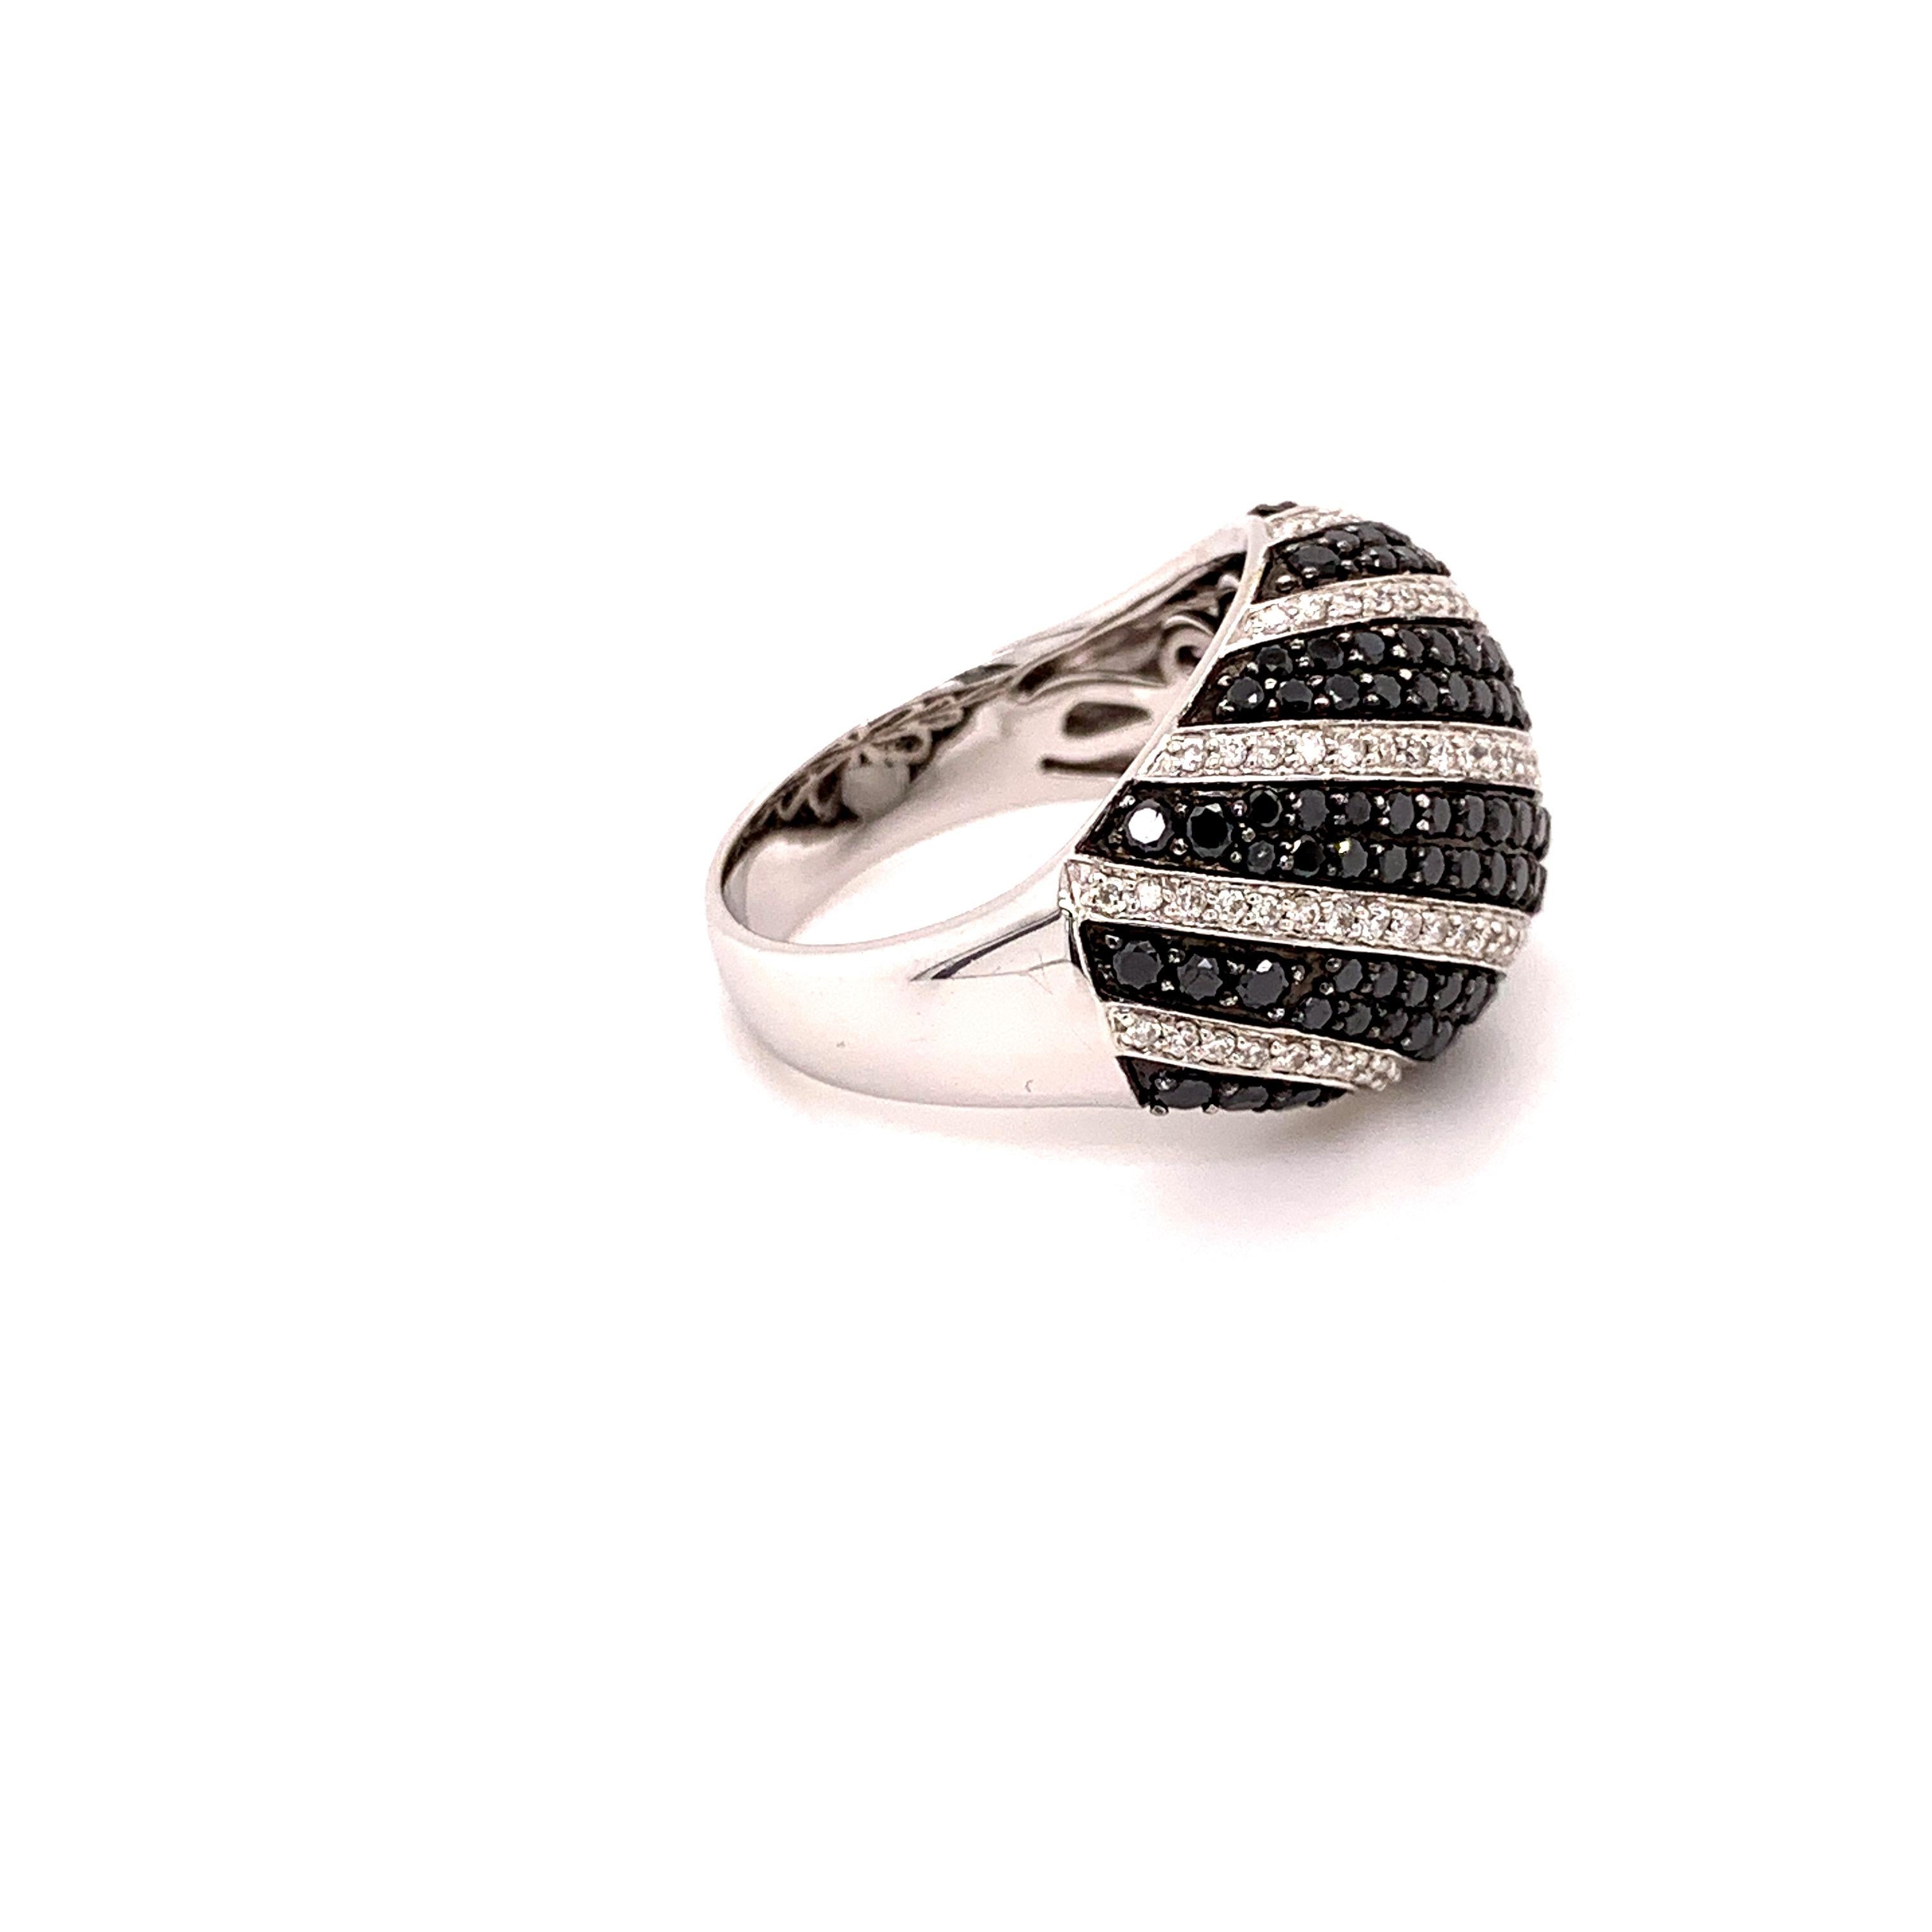 Glamorous black diamond ring. Sparkling round brilliant cut, 1.36 carats black diamond accented with round brilliant cut diamond set multiple diagonal rows. Contemporary handcrafted high dome design set in 18 karats white gold.  Statement